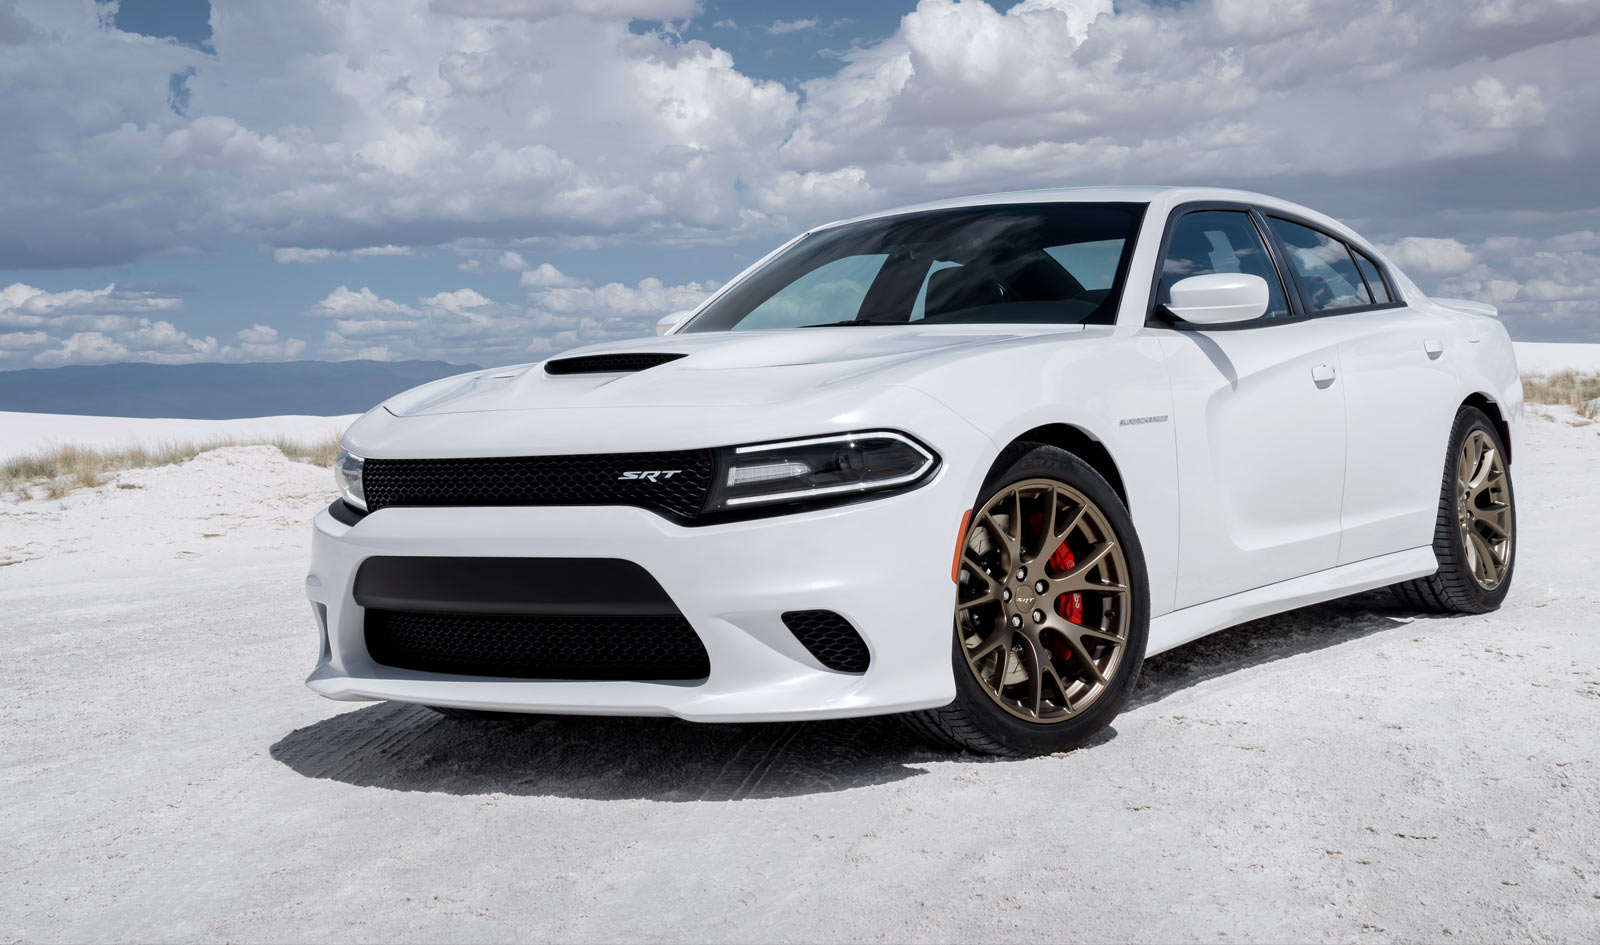 Amazing 2015 Dodge Charger Pictures & Backgrounds